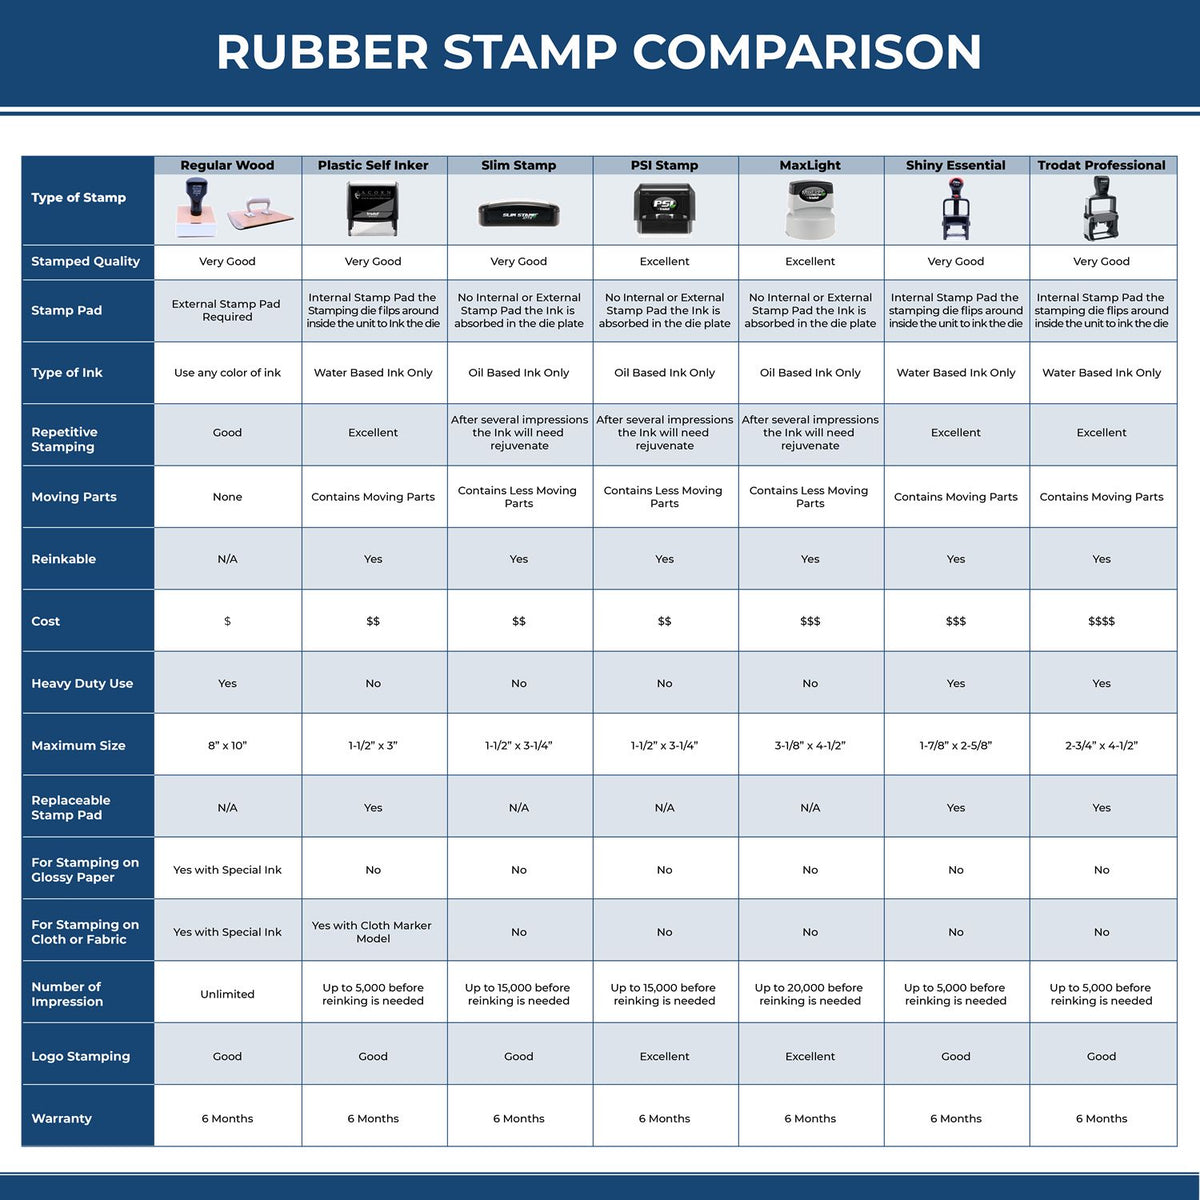 A comparison chart for the different types of mount models available for the Self-Inking Utah PE Stamp.